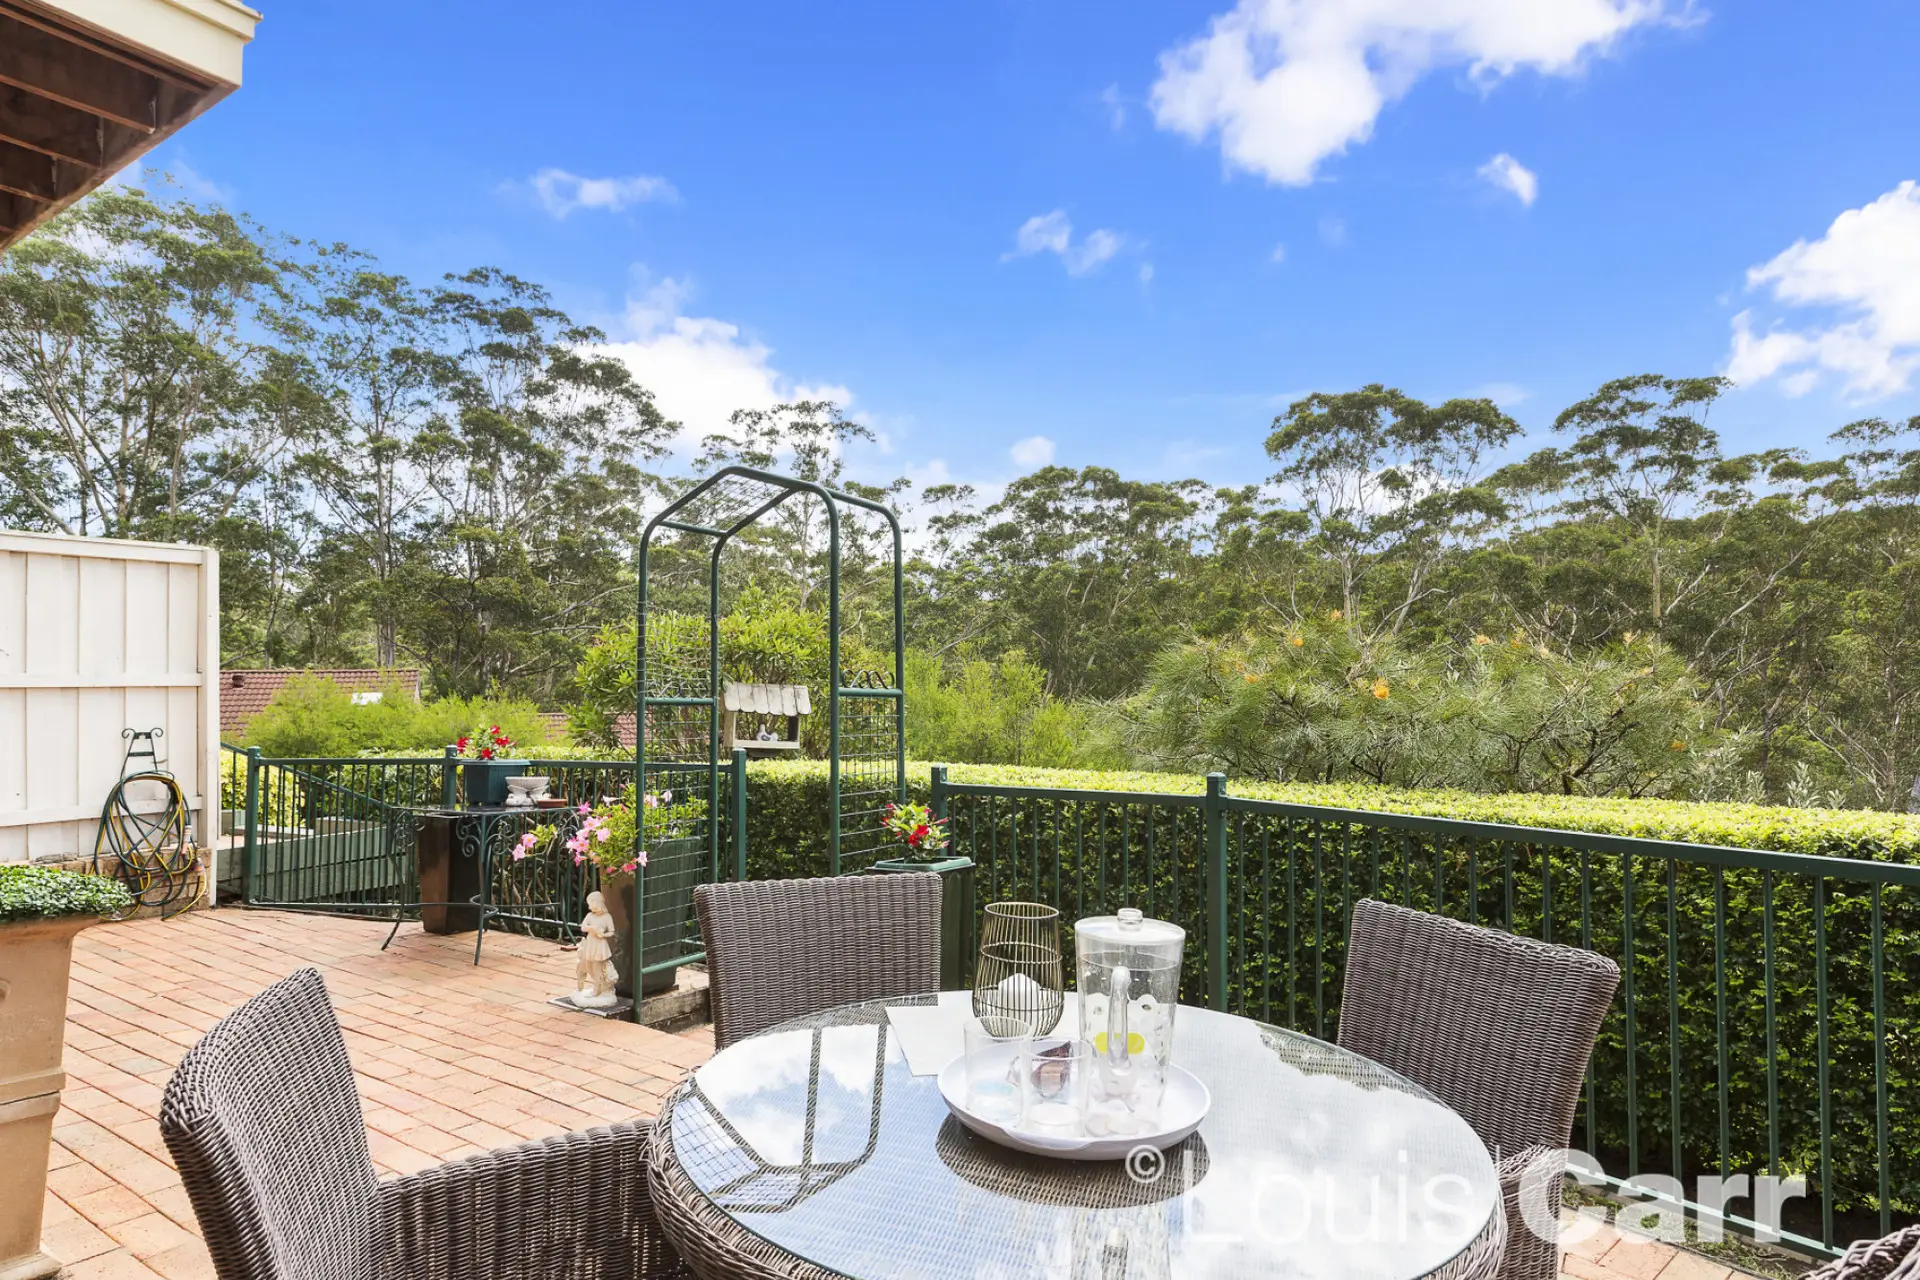 Photo #4: 22/1 Beahan Place, Cherrybrook - Sold by Louis Carr Real Estate